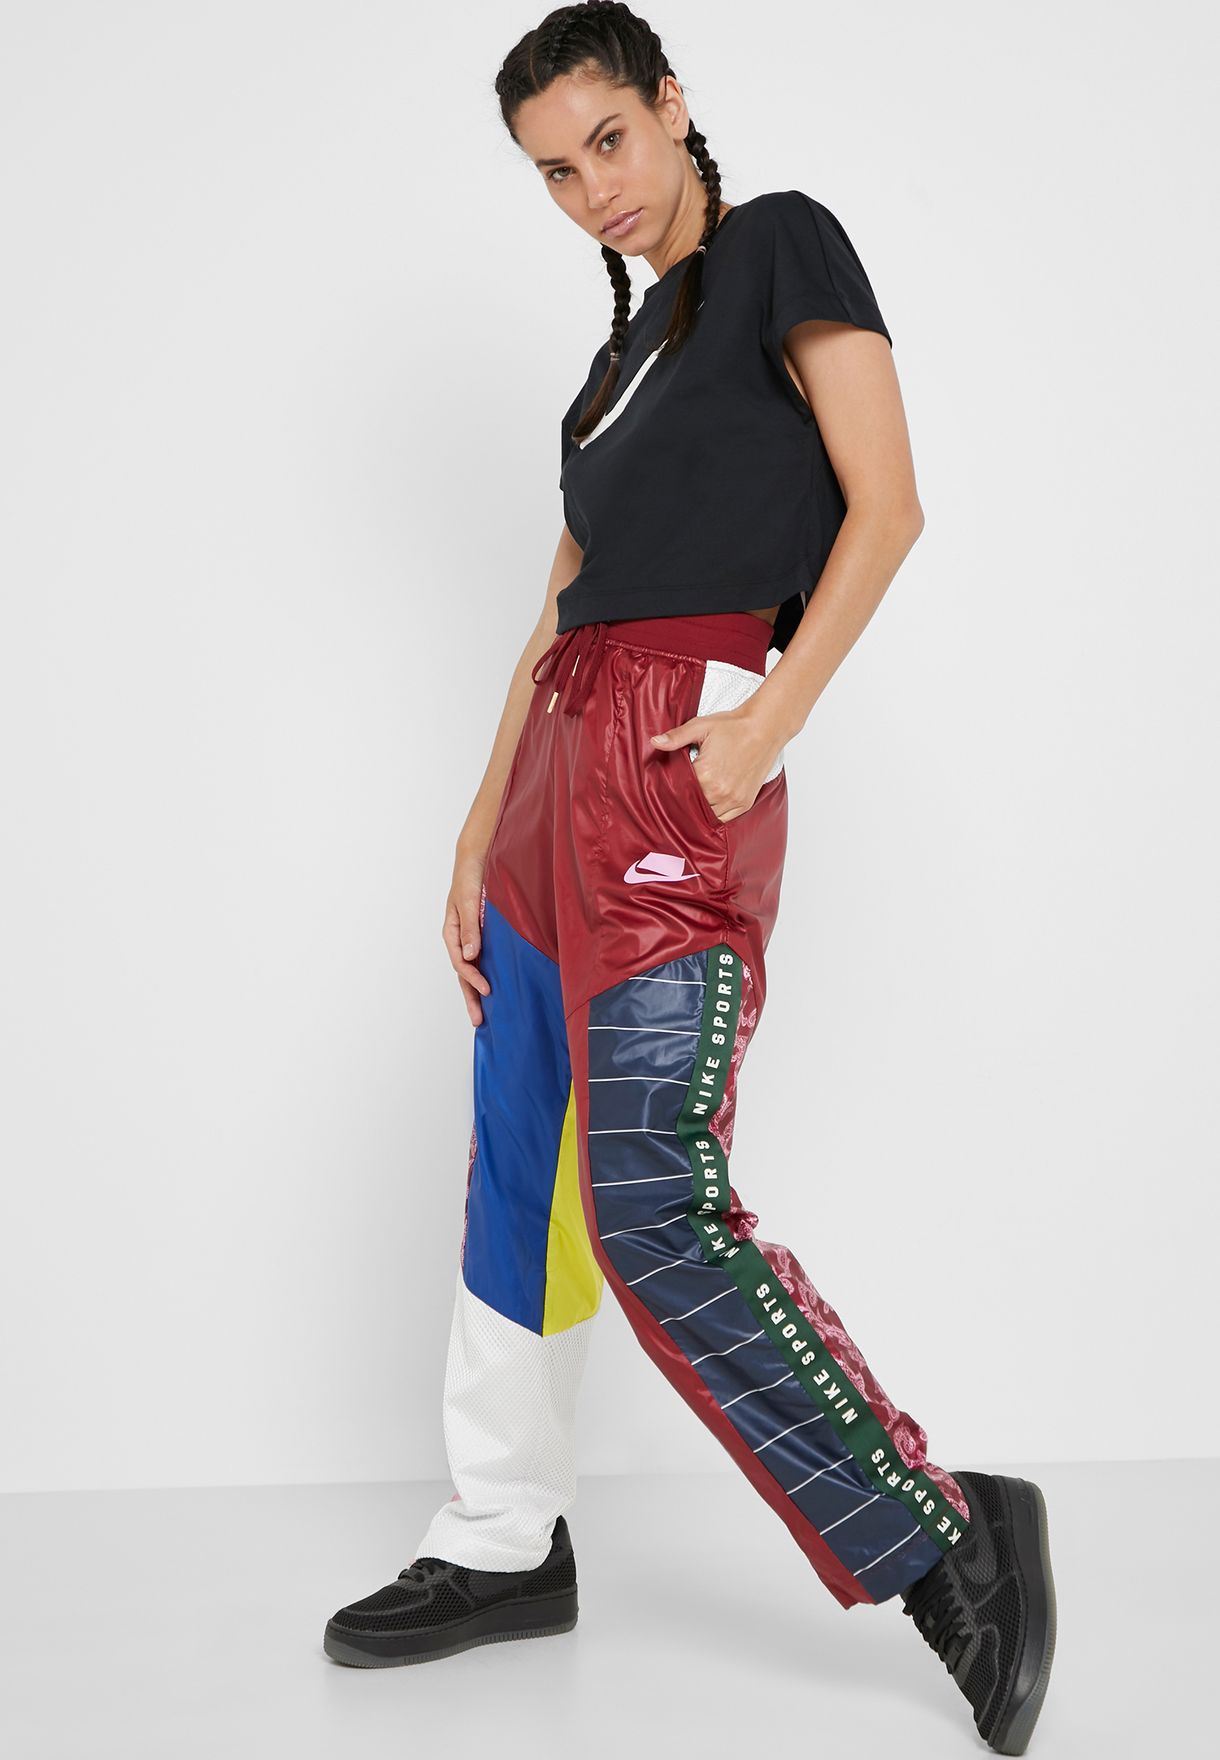 nsw woven track pants